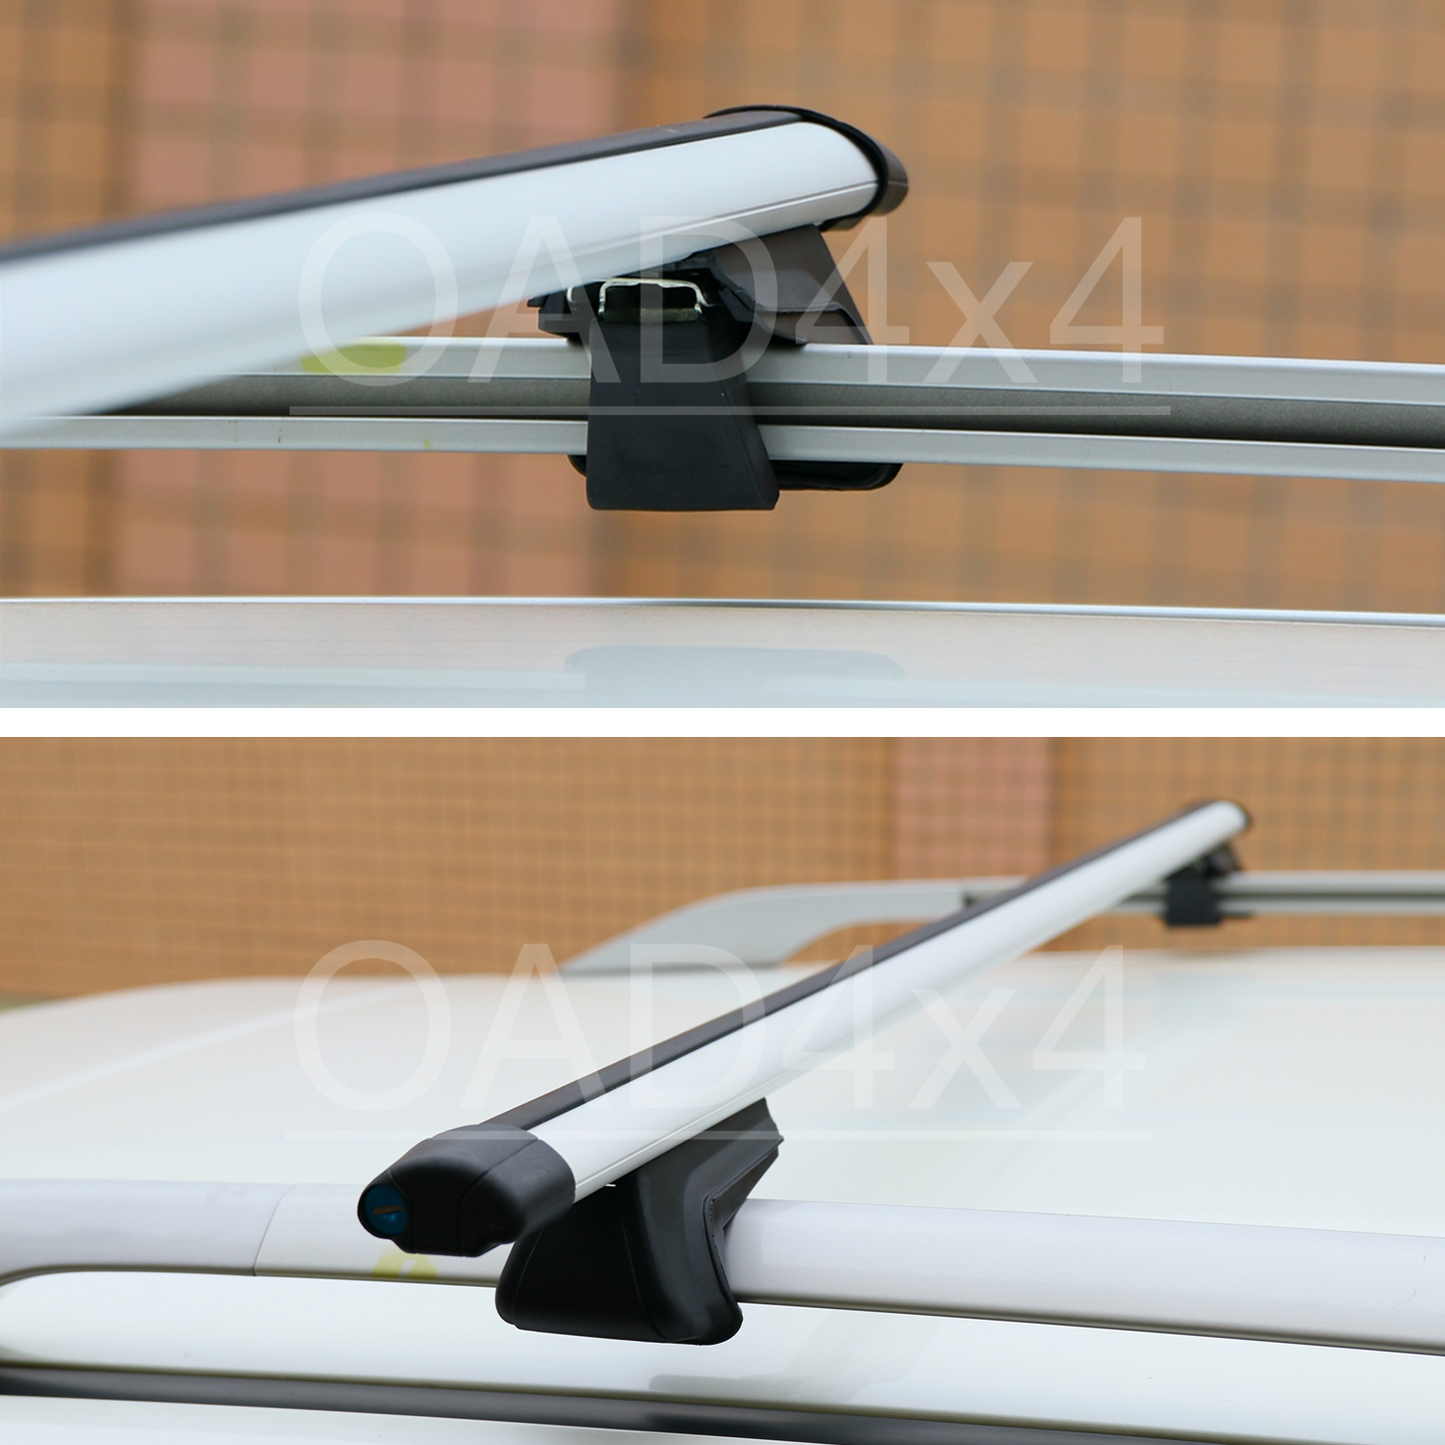 1 Pair Aluminum Silver Cross Bar Roof Racks Baggage holder for BMW 3 series E46 Wagon 98-06 with raised roof rail